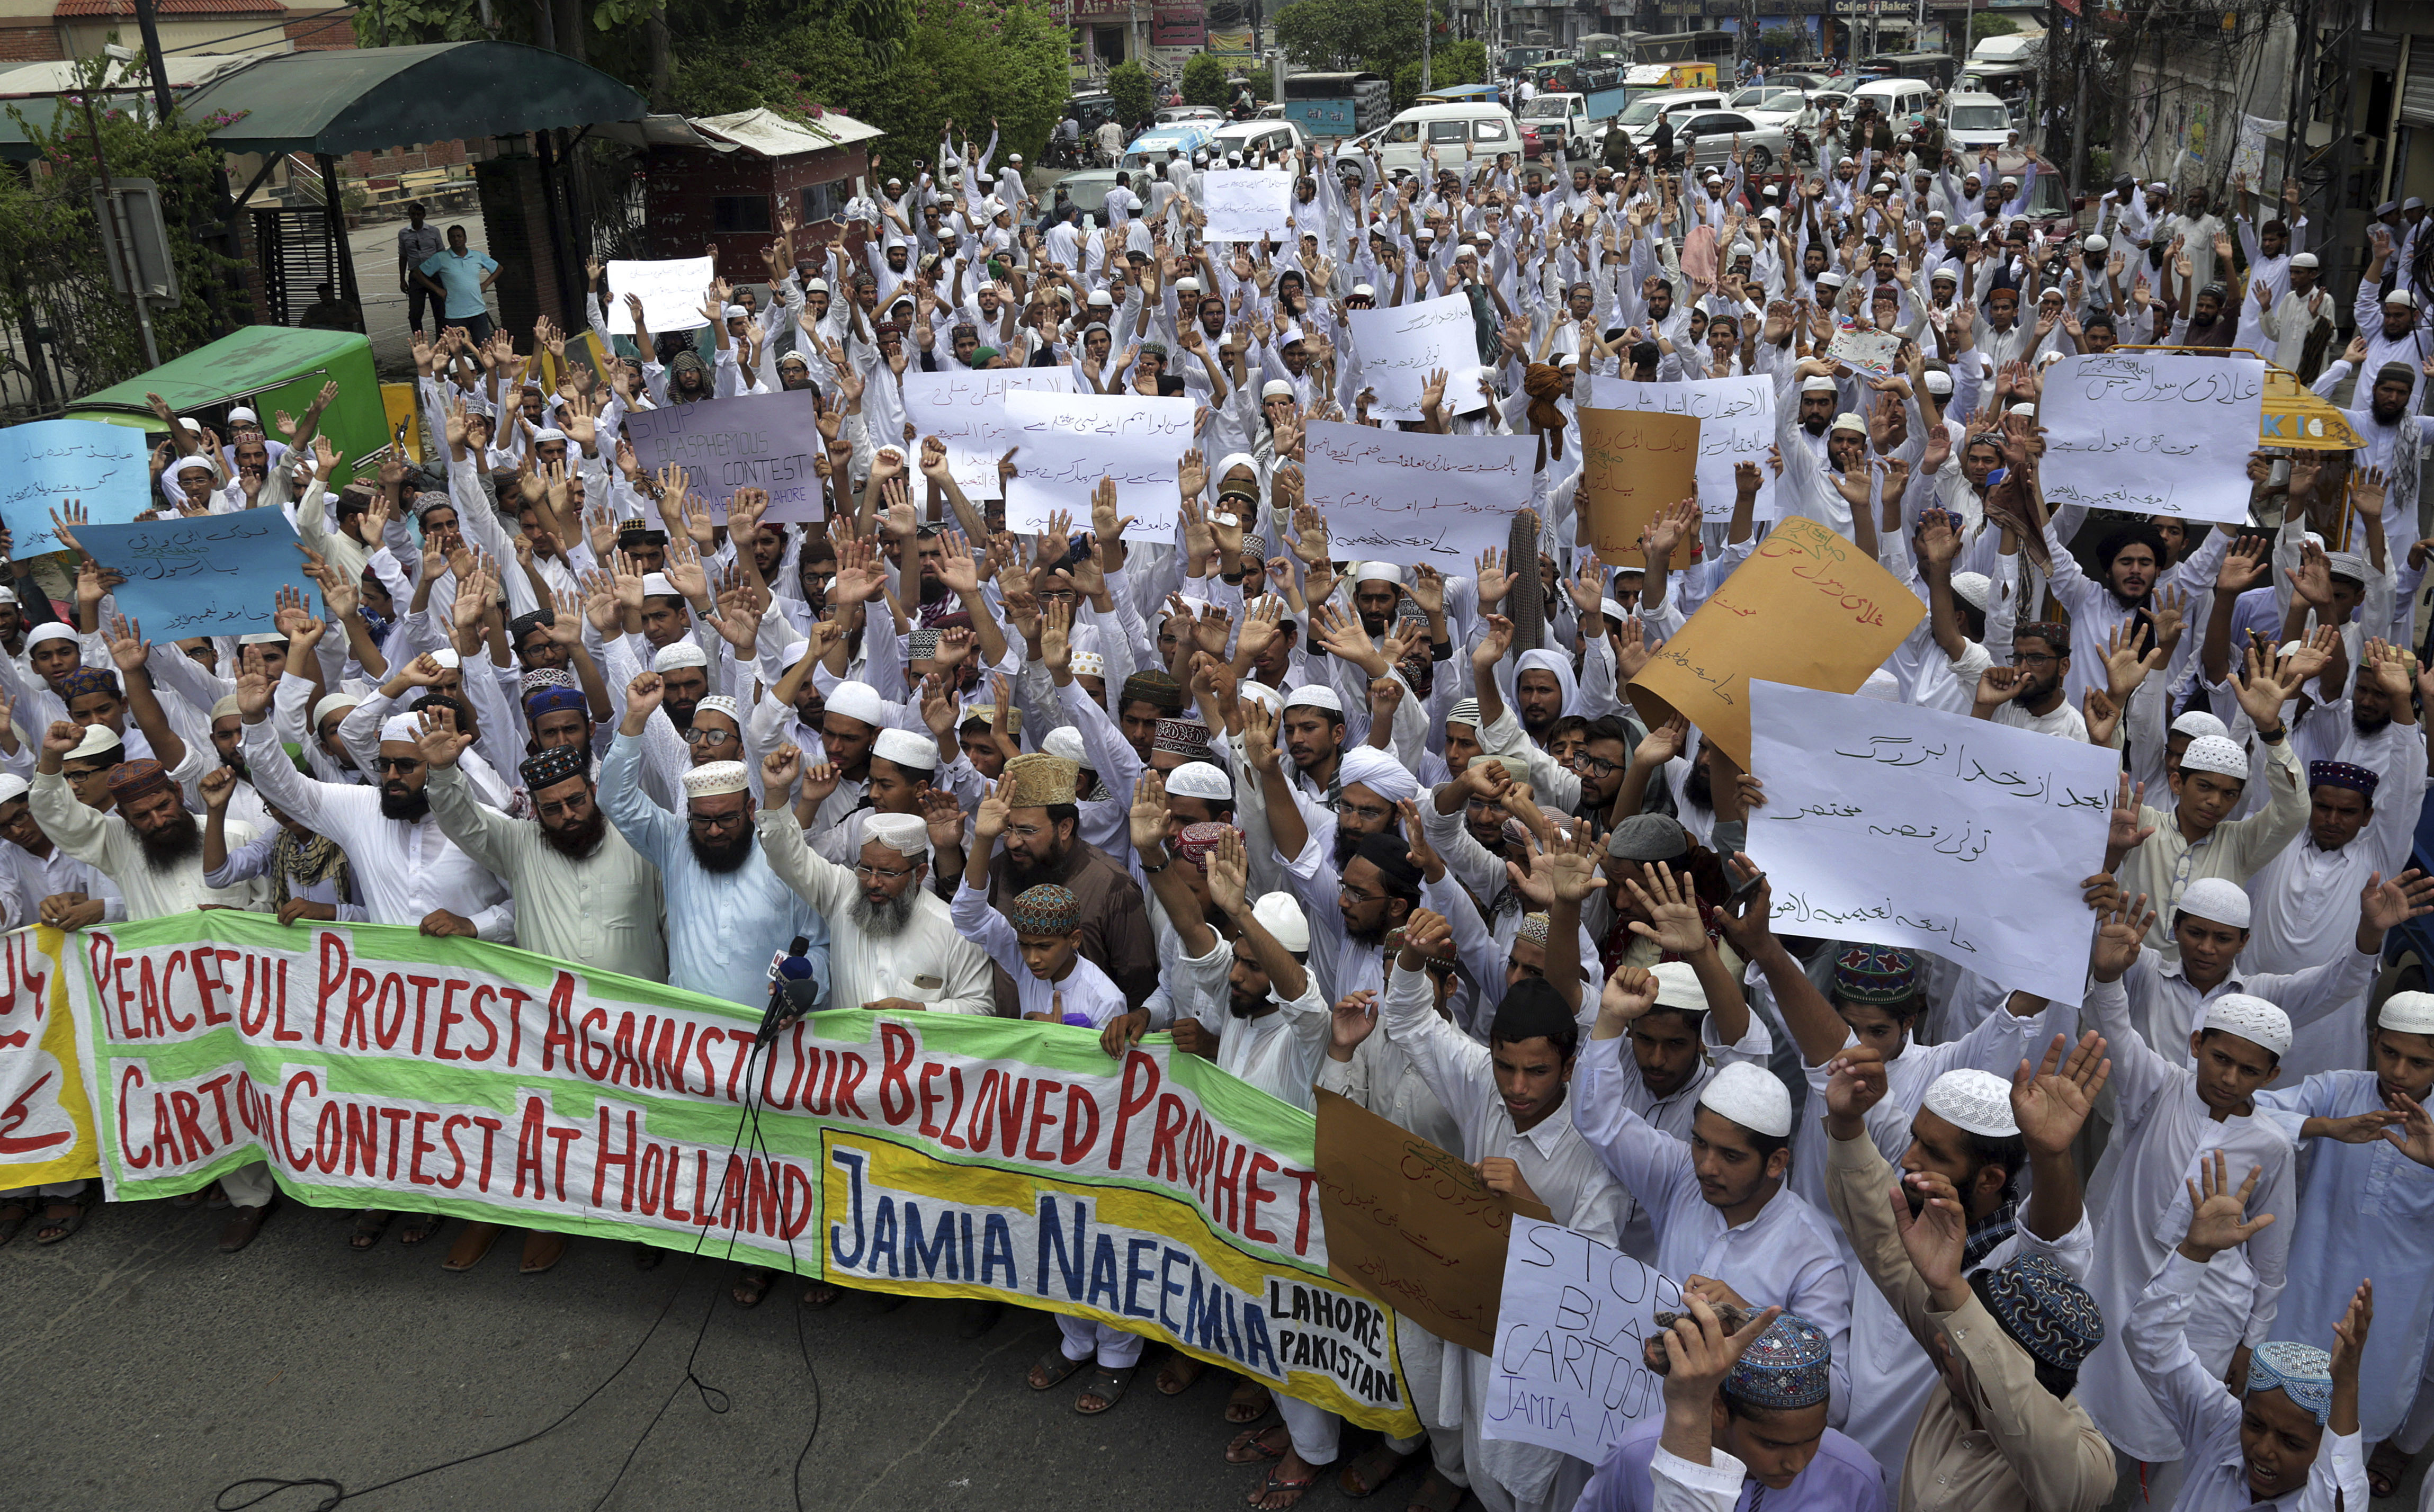 Teacher and students of an Islamic seminary 'Jamia Naeemia' chant slogans during a demonstration in Lahore, Pakistan, Wednesday, Aug. 29, 2018, condemning a cartoon contest planned by Geert Wilders, a Dutch parliamentarian. Members of a Pakistani Islamist group that made surprising gains in last month's national elections rallied against Dutch lawmaker Geert Wilders, who plans to hold a Prophet Muhammad cartoon competition in November. (AP Photo/K.M. Chaudary)